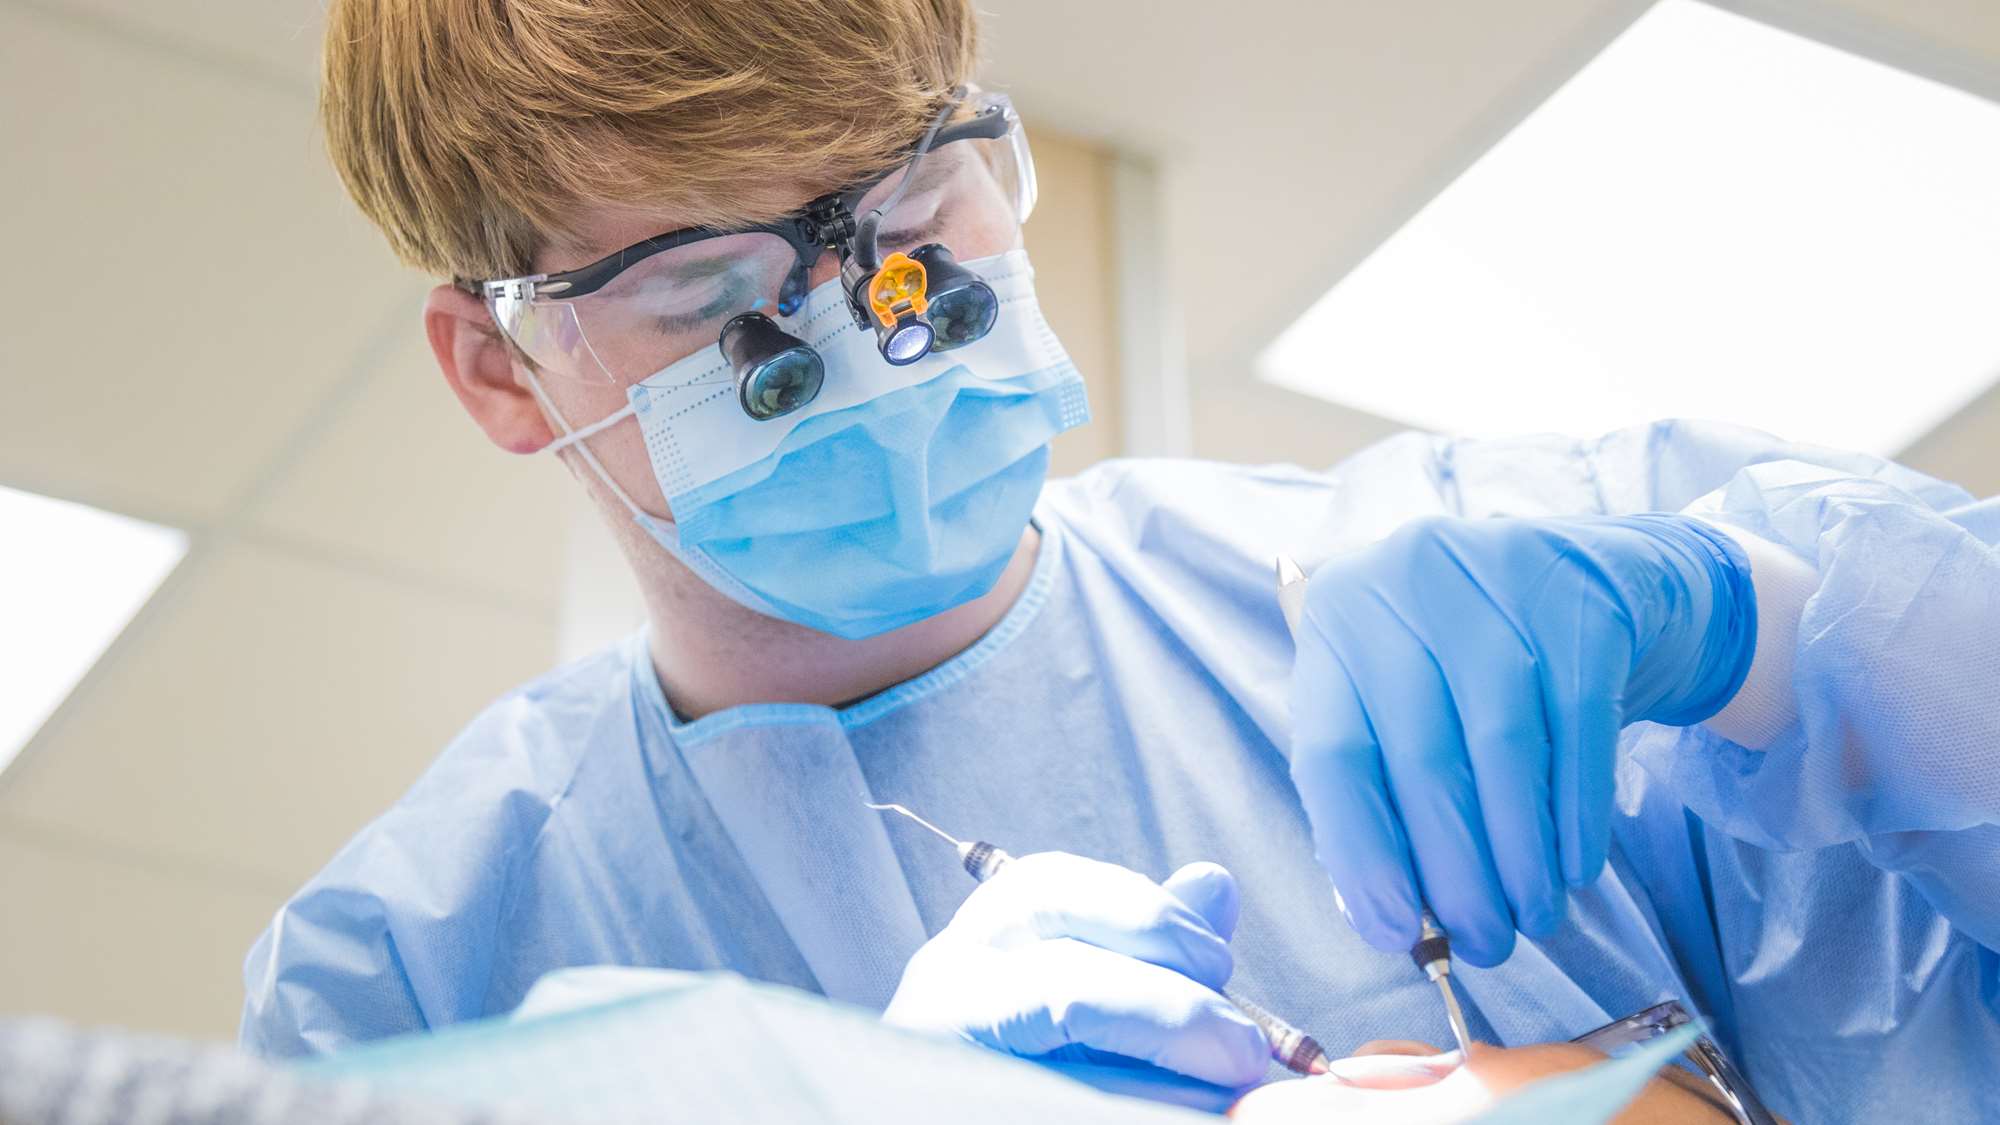 Best Dental Hygiene Schools In New Hampshire | Cost, Requirement & How To Apply